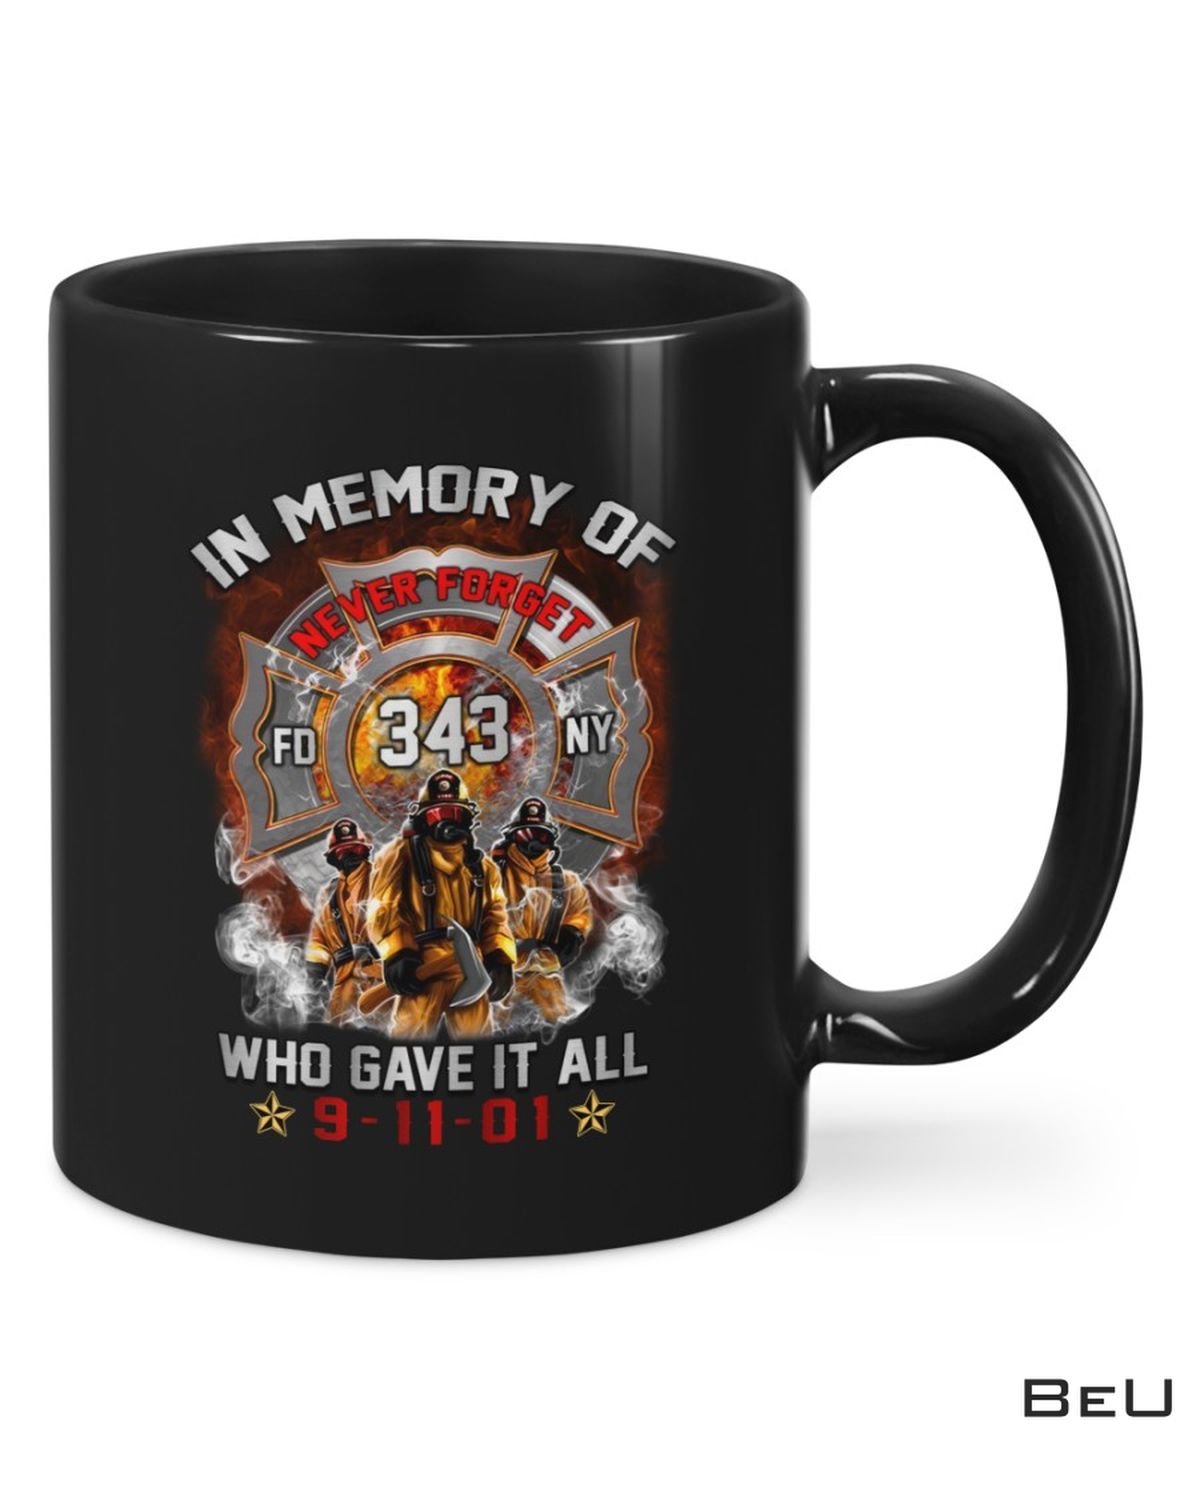 In Memory Of Never Forget 343 Who Gave It All 9-11-01 Mug